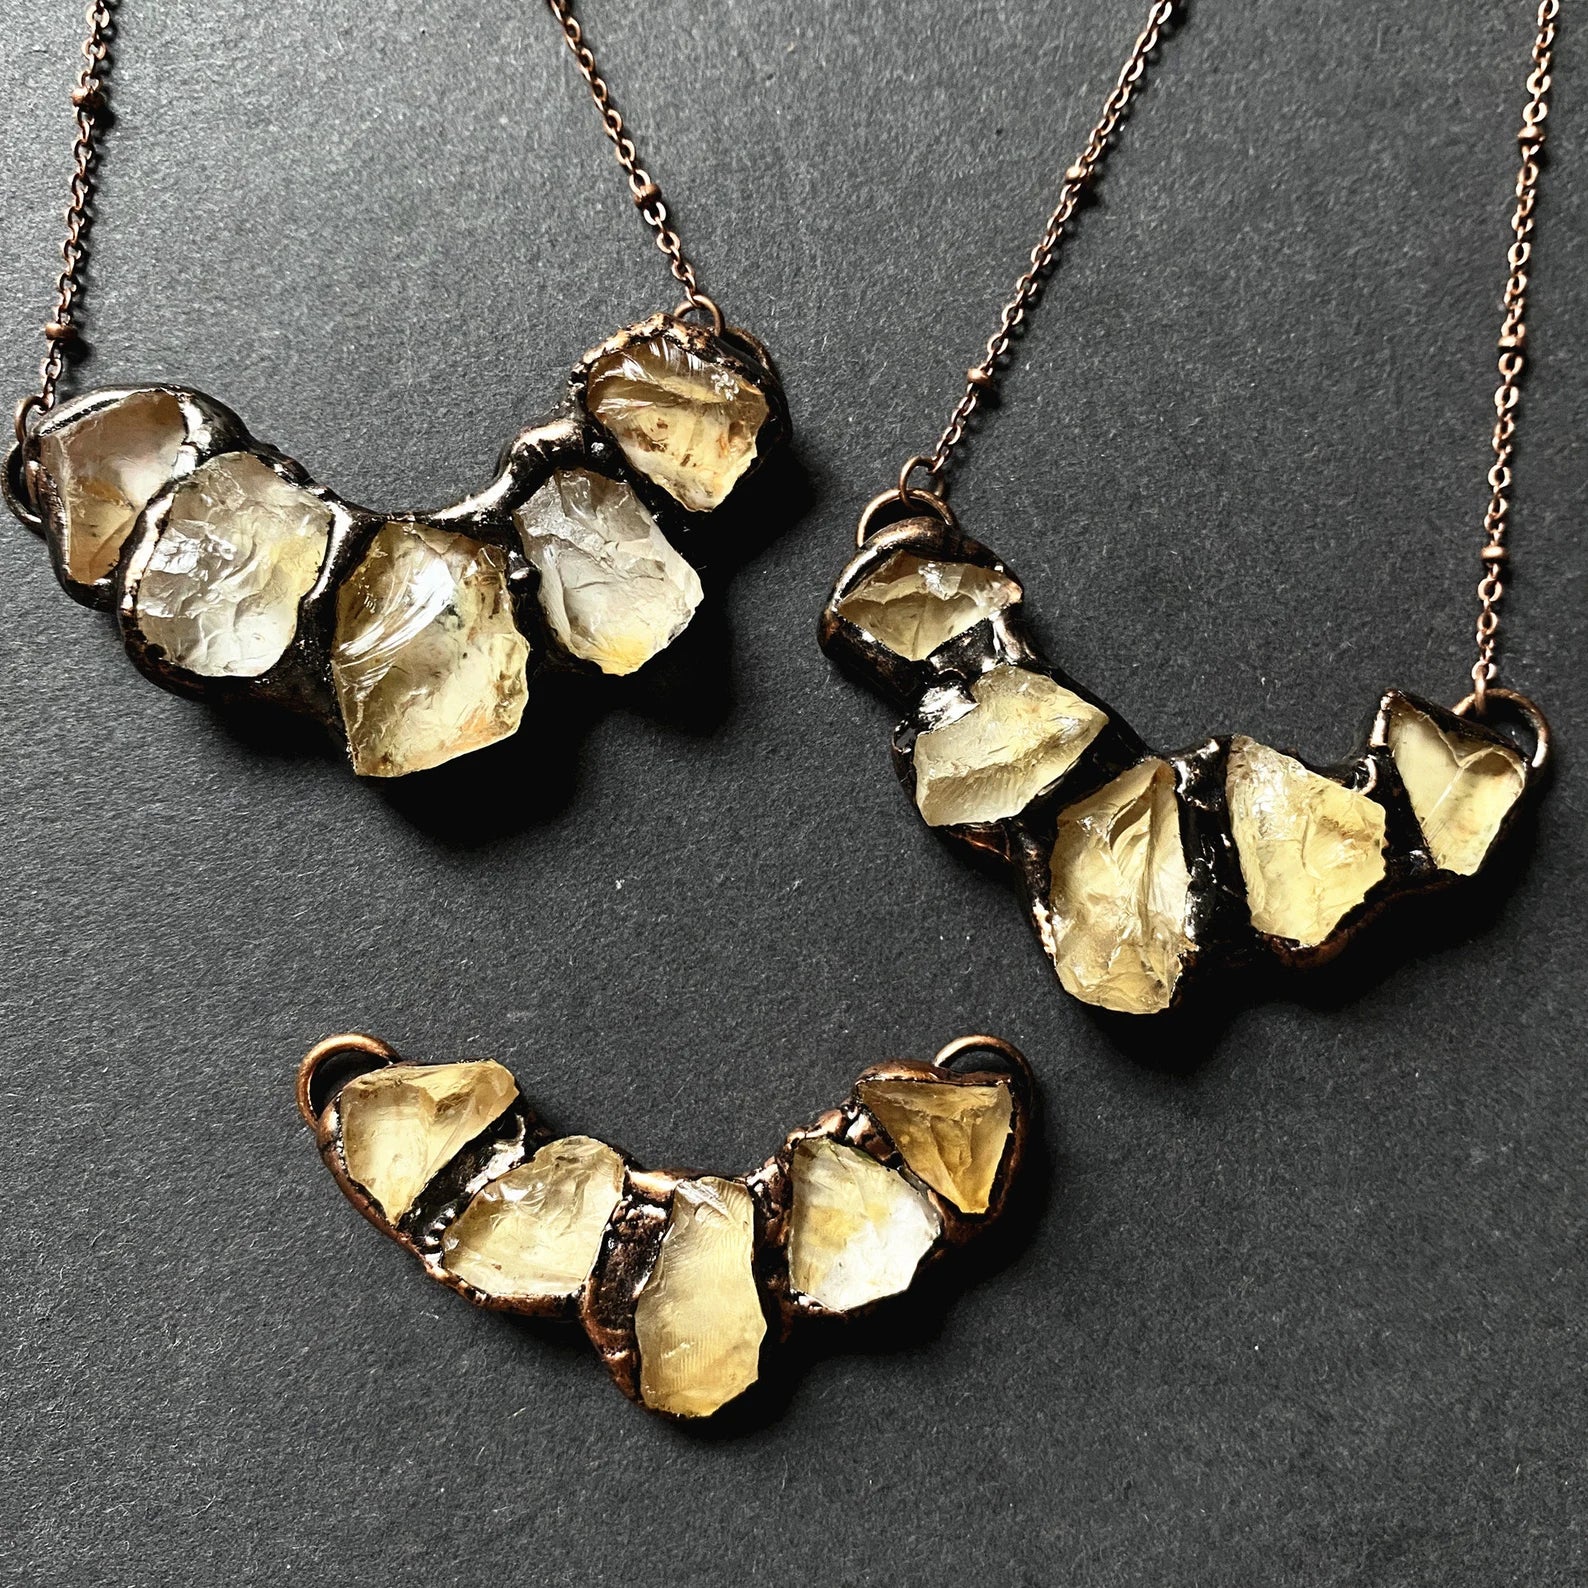 Whole Store Raw Citrine 5 piece Pendant with Antique Rose Gold Plated Necklace